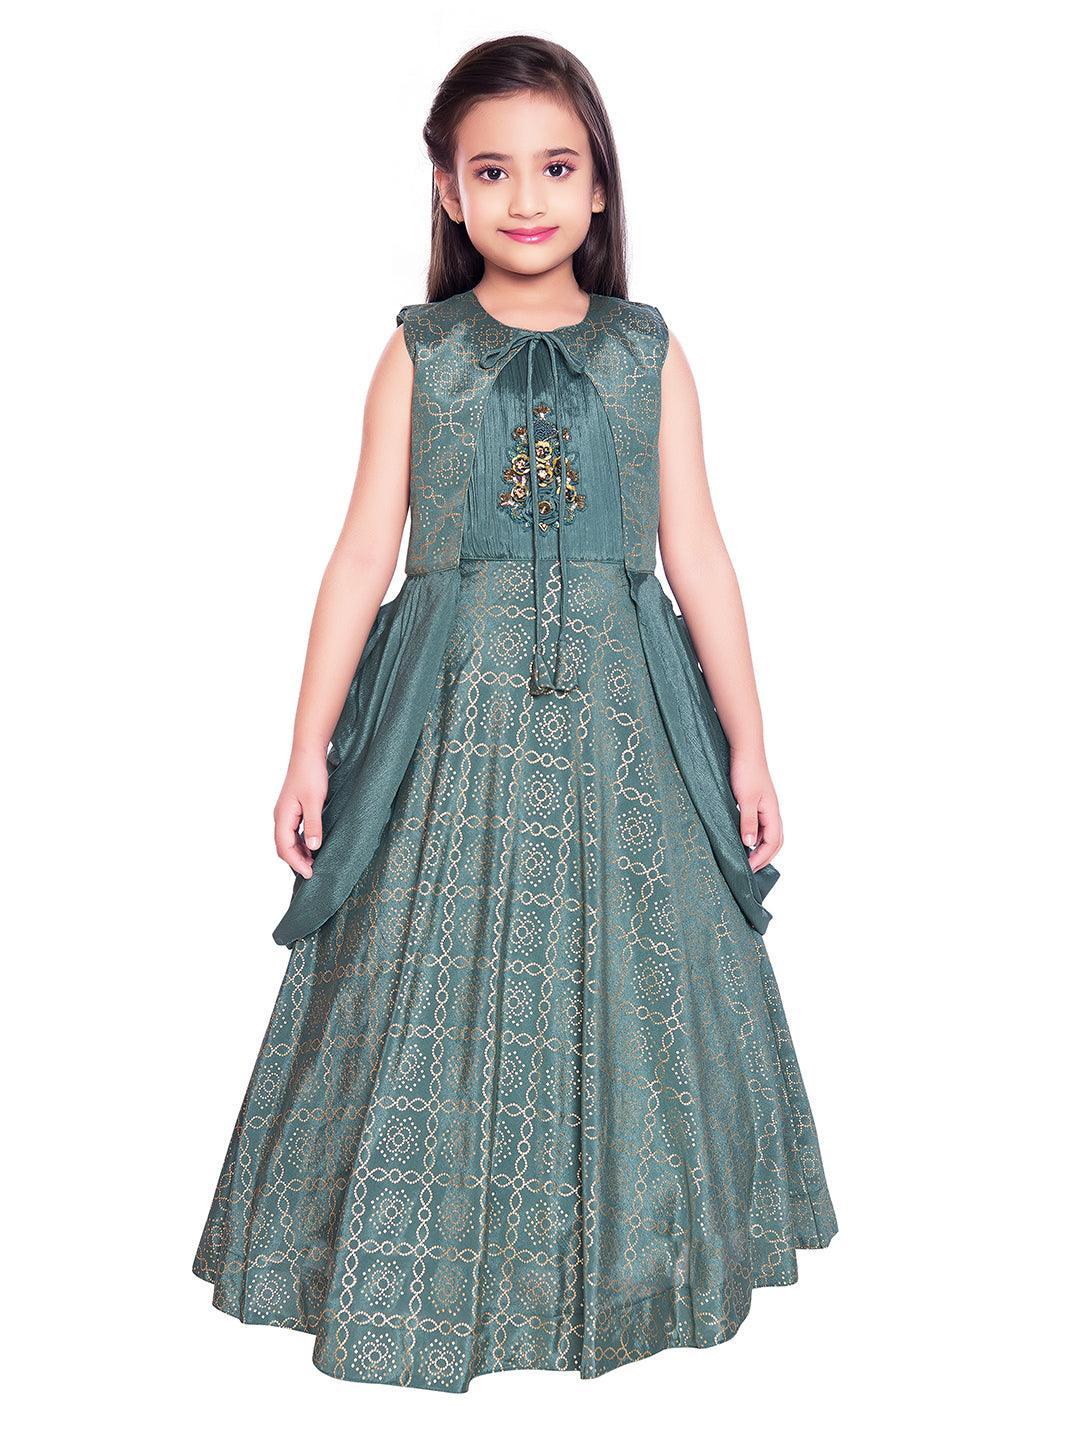 Wine Colored Frock For Kids From Betty Ethnic | Girls dresses diy, Kids  dress collection, Frocks for kids